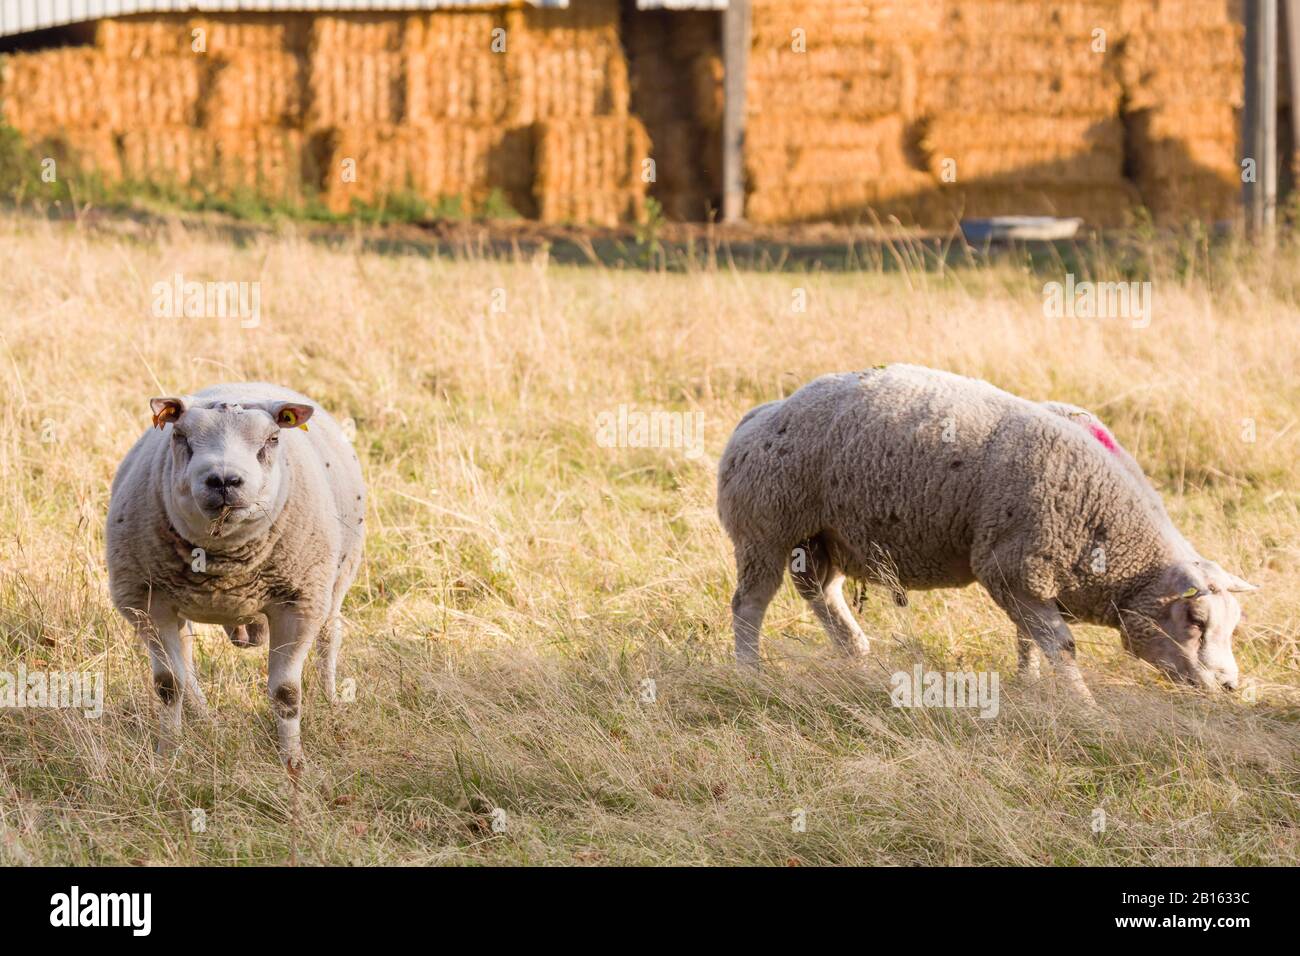 Sheep or rams, farm animals grazing in a field, UK Stock Photo